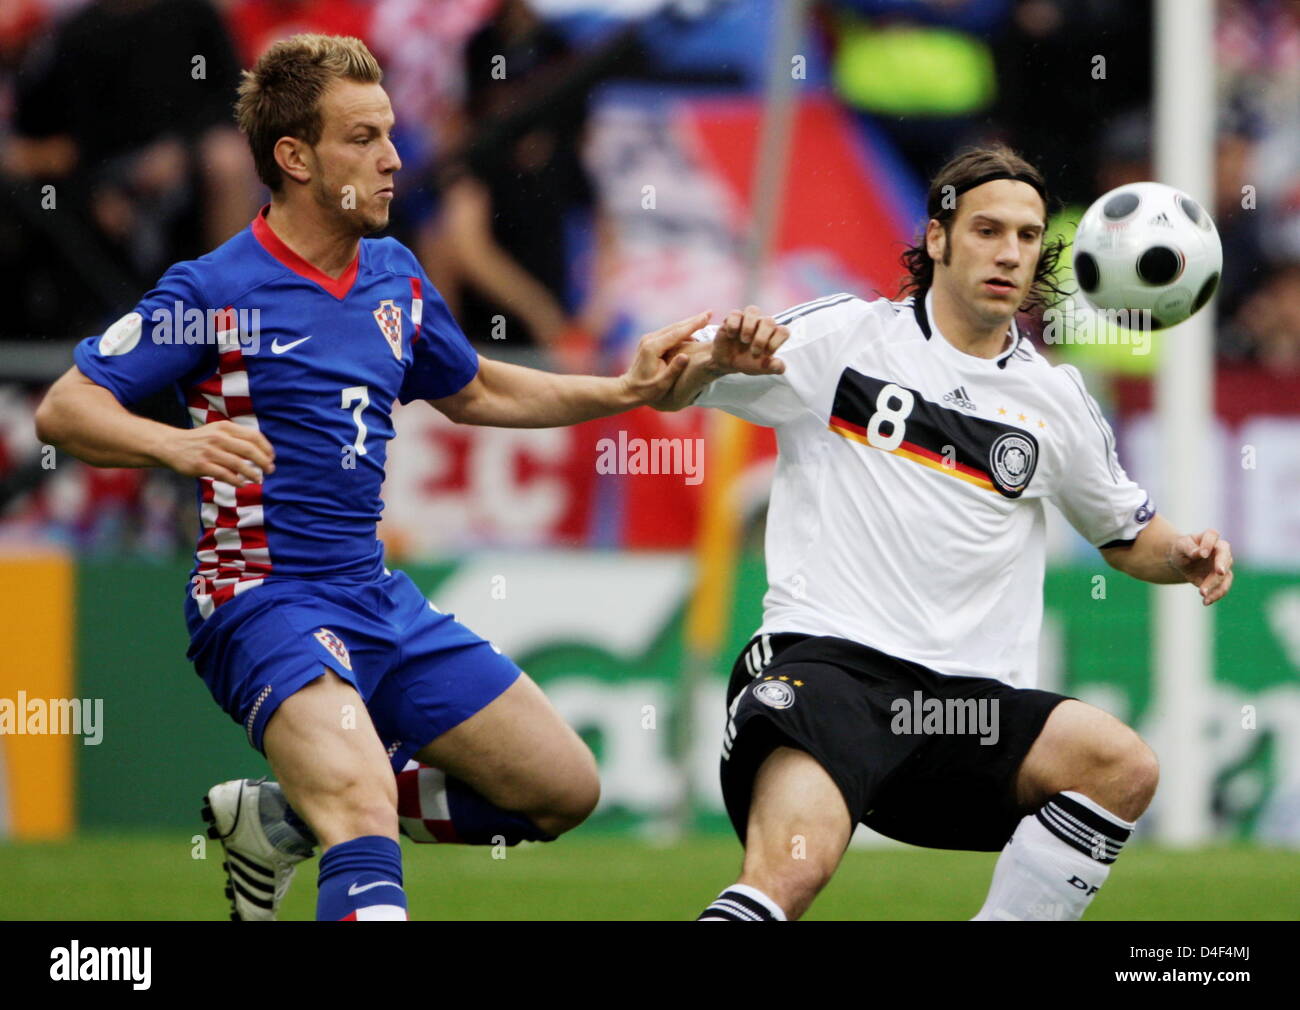 Ivan Rakitic (L) of Croatia vies with Torsten Frings of Germany during the UEFA EURO 2008 Group B preliminary round match between Croatia and Germany at the Woerthersee stadium in Klagenfurt, Austria, 12 June 2008. Photo: Oliver Berg dpa +please note UEFA restrictions particulary in regard to slide shows and 'No Mobile Services'+ +++(c) dpa - Bildfunk+++ Stock Photo